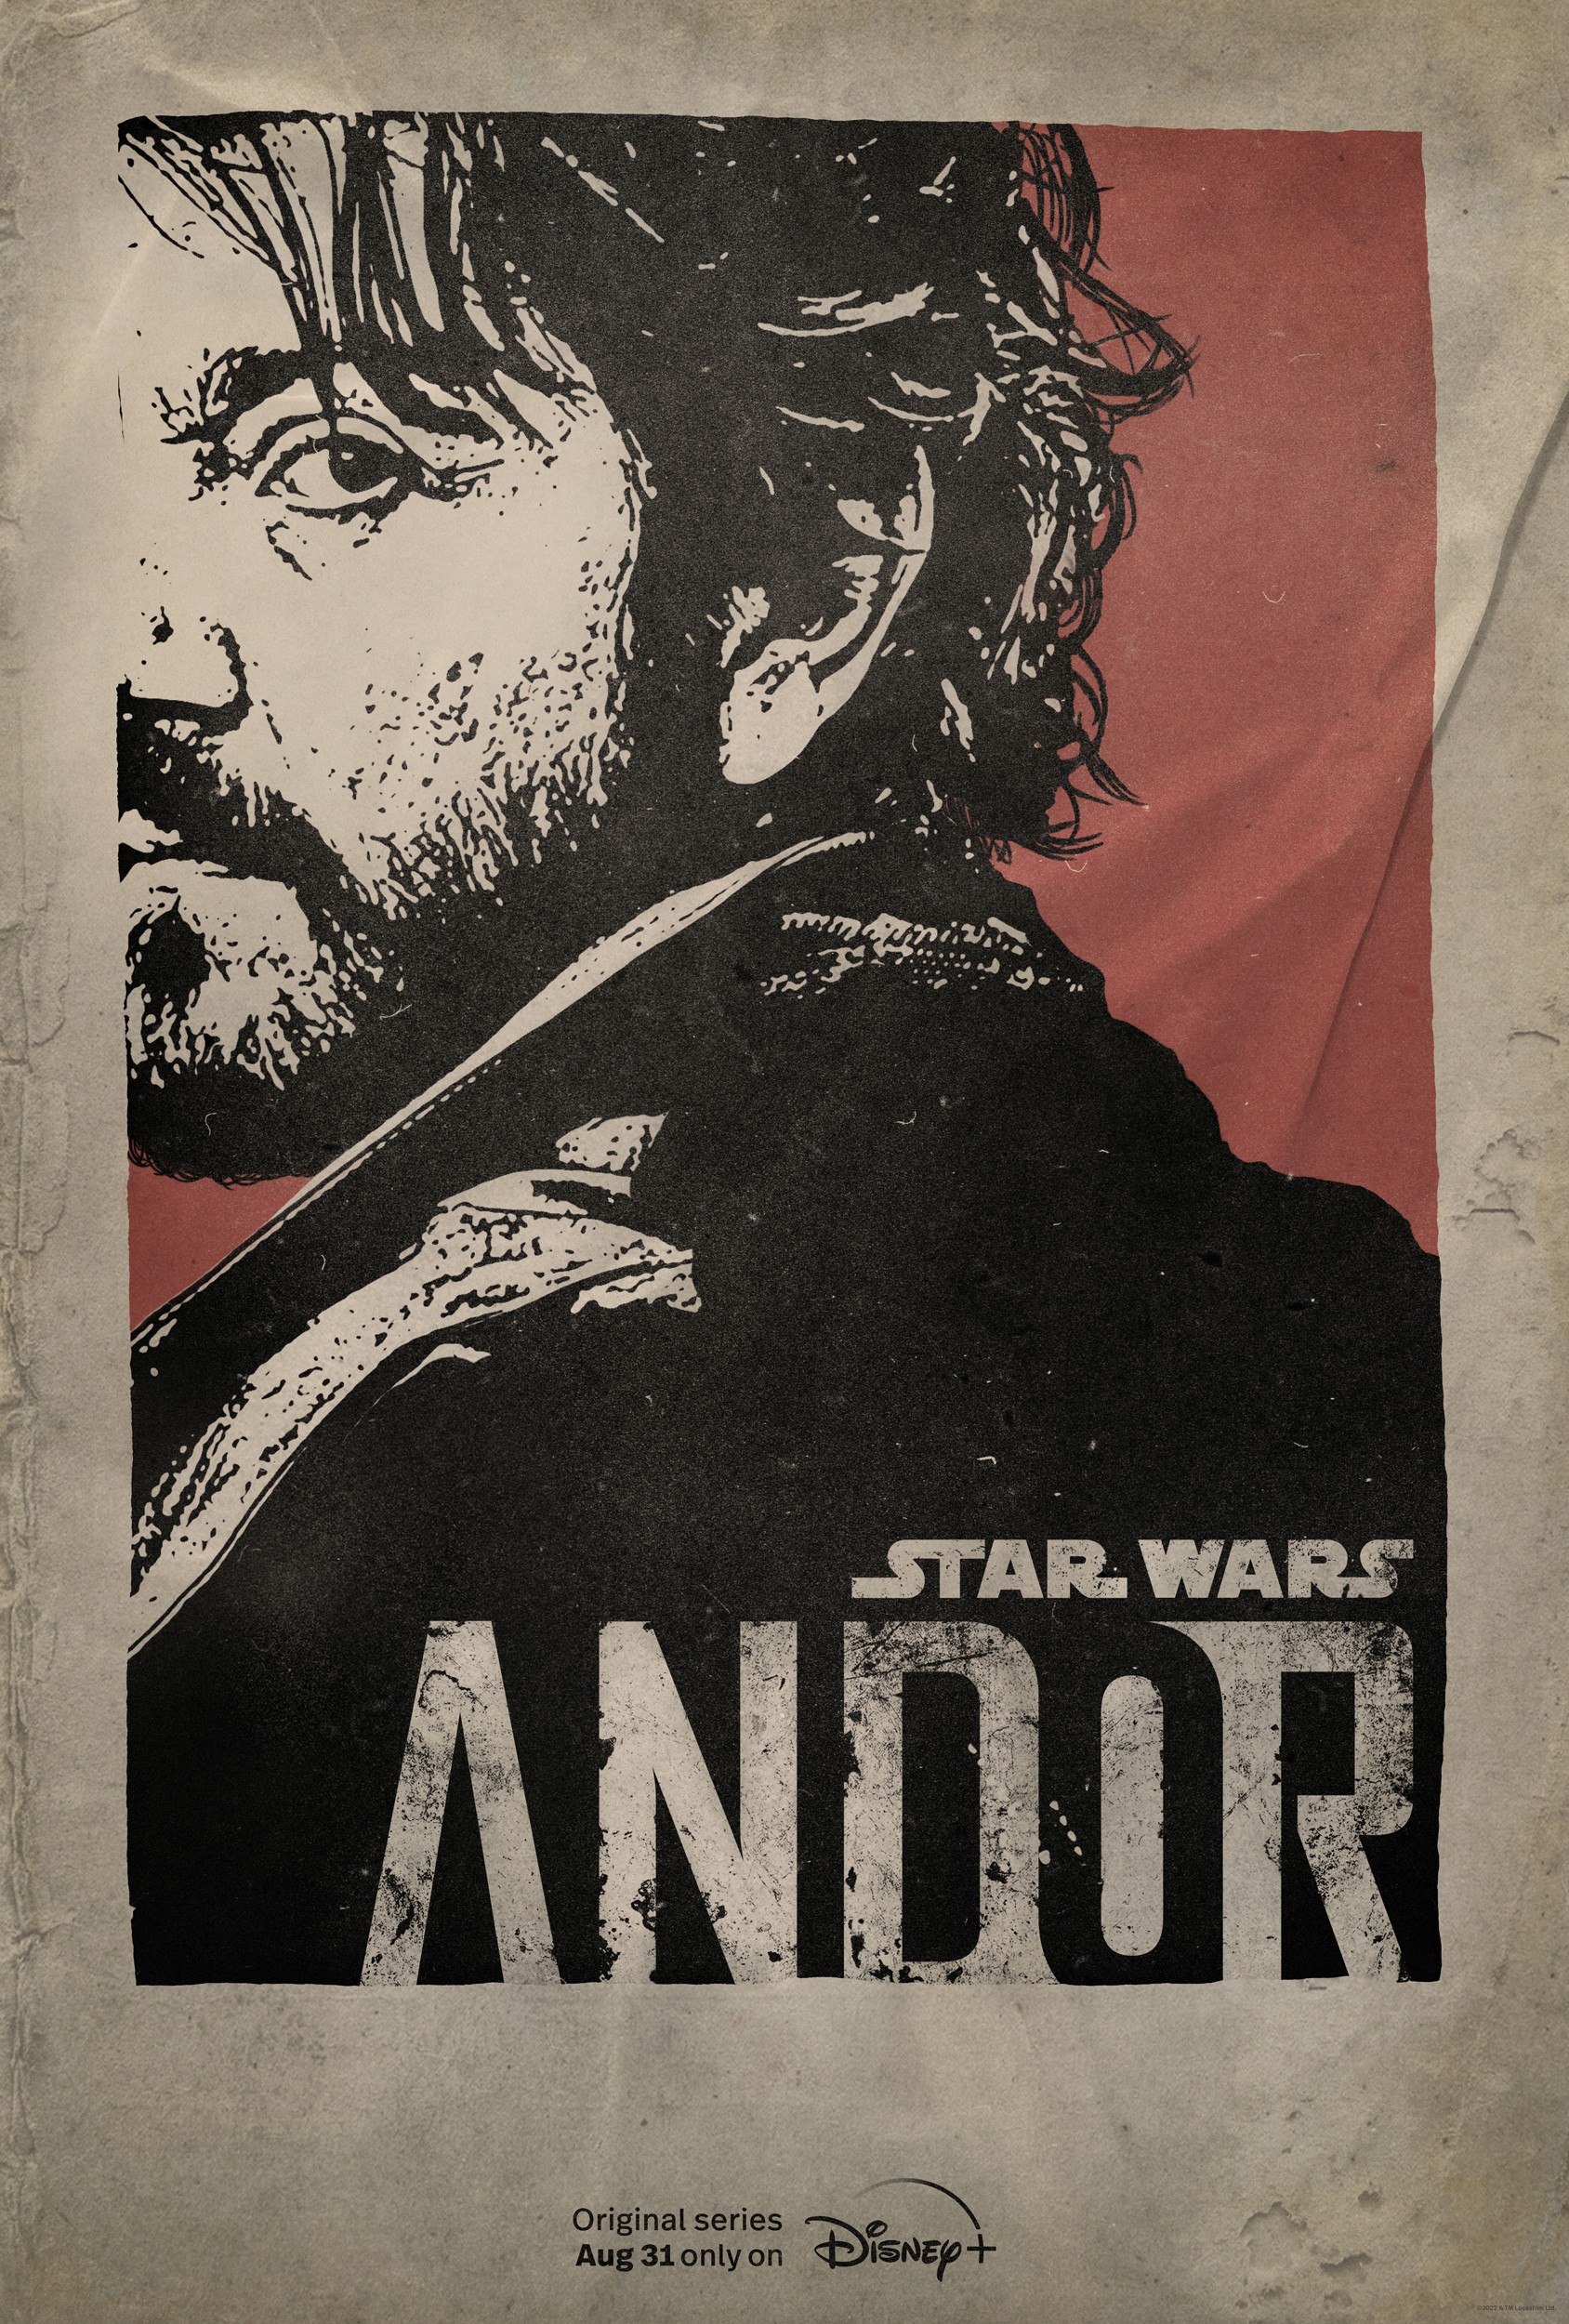 Rotten Tomatoes - #Andor is #CertifiedFresh at 93% on the